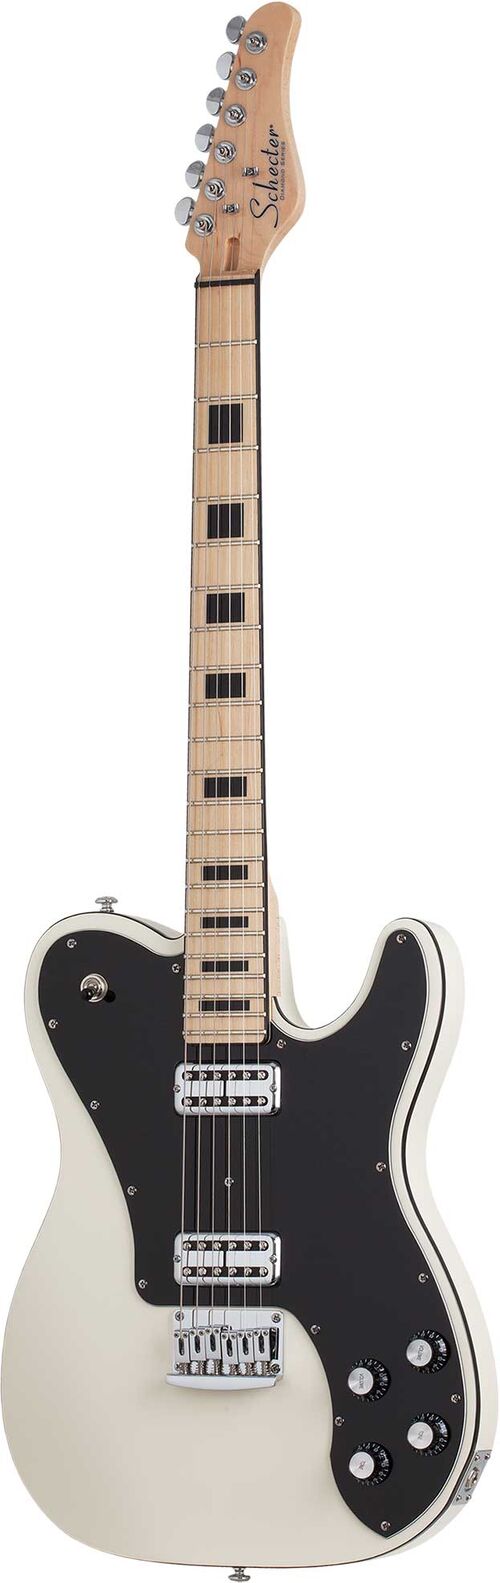 Pt Fastback Owht Schecter